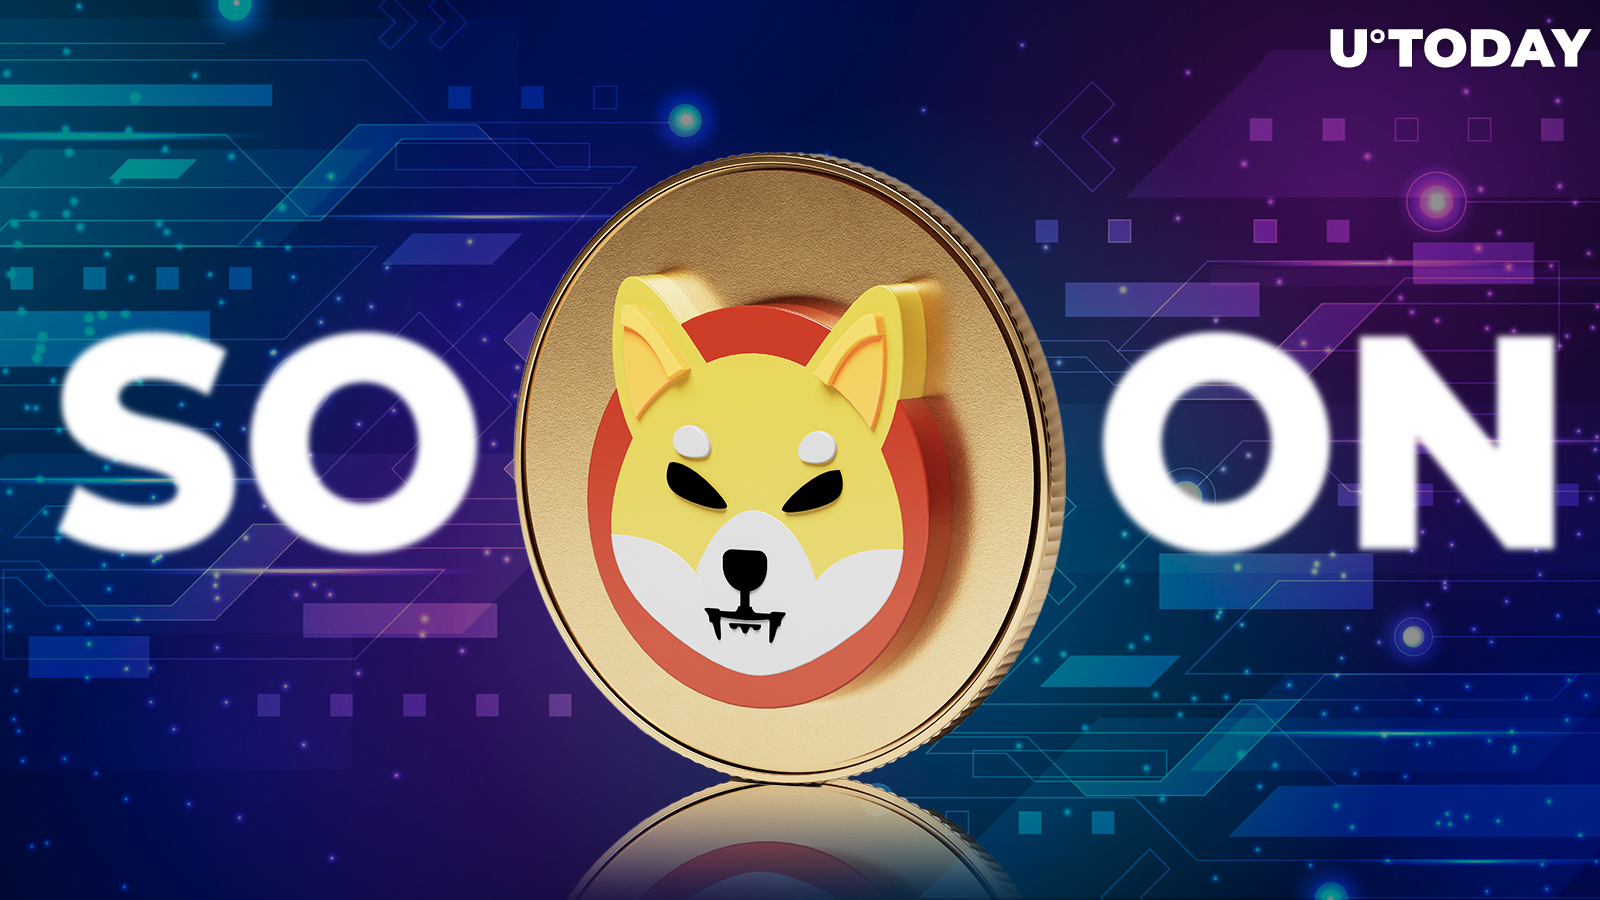 Shiba Inu Team's Cryptic 'Soon' Message Sparks Speculation